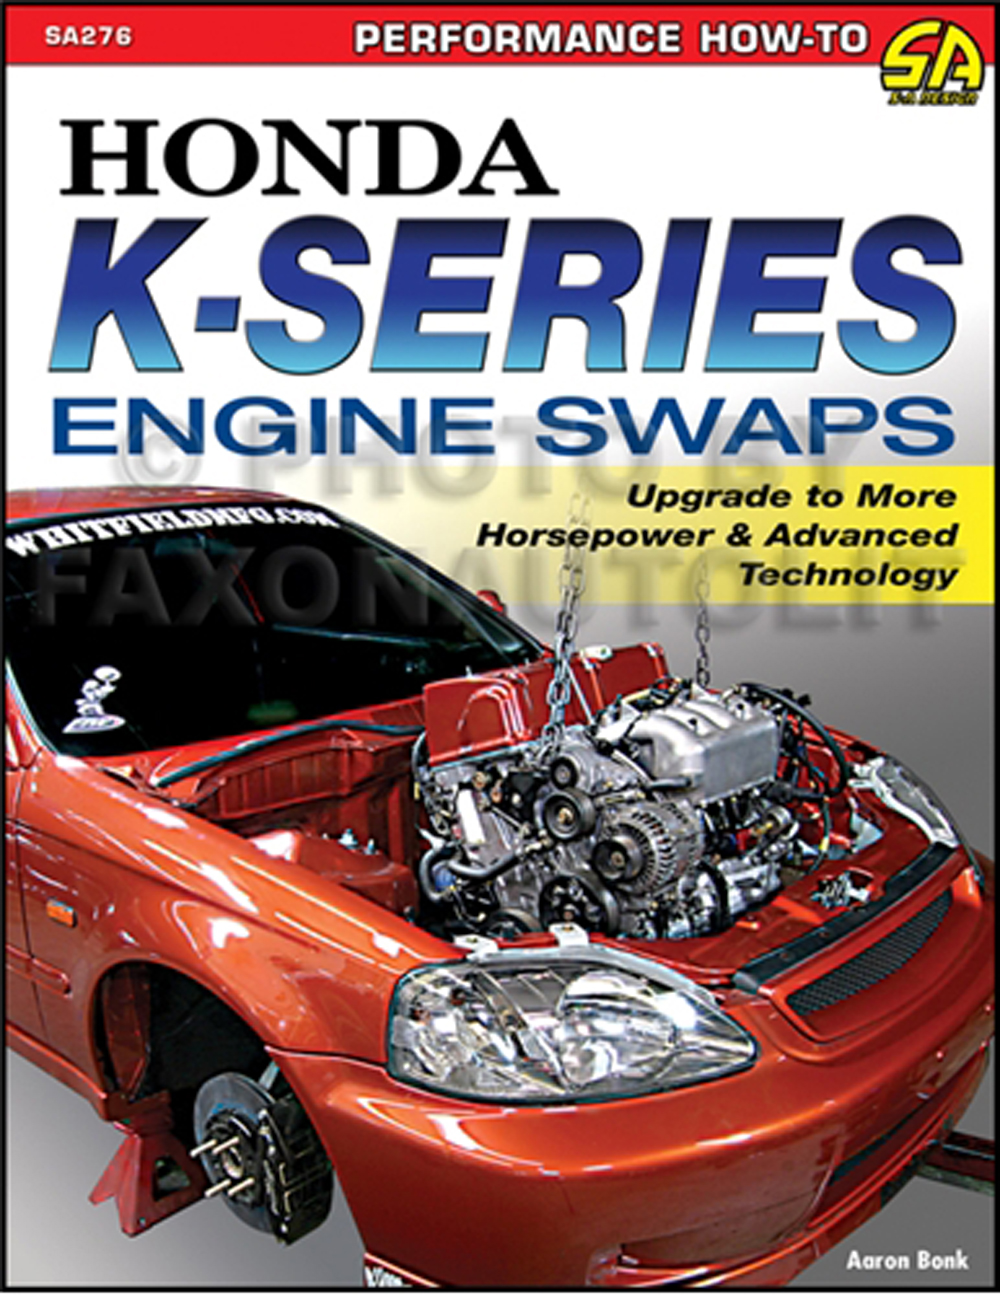 Honda K-Series Engine Swaps: How to Swap 2002-2013 Engines into 1988-2005 Cars